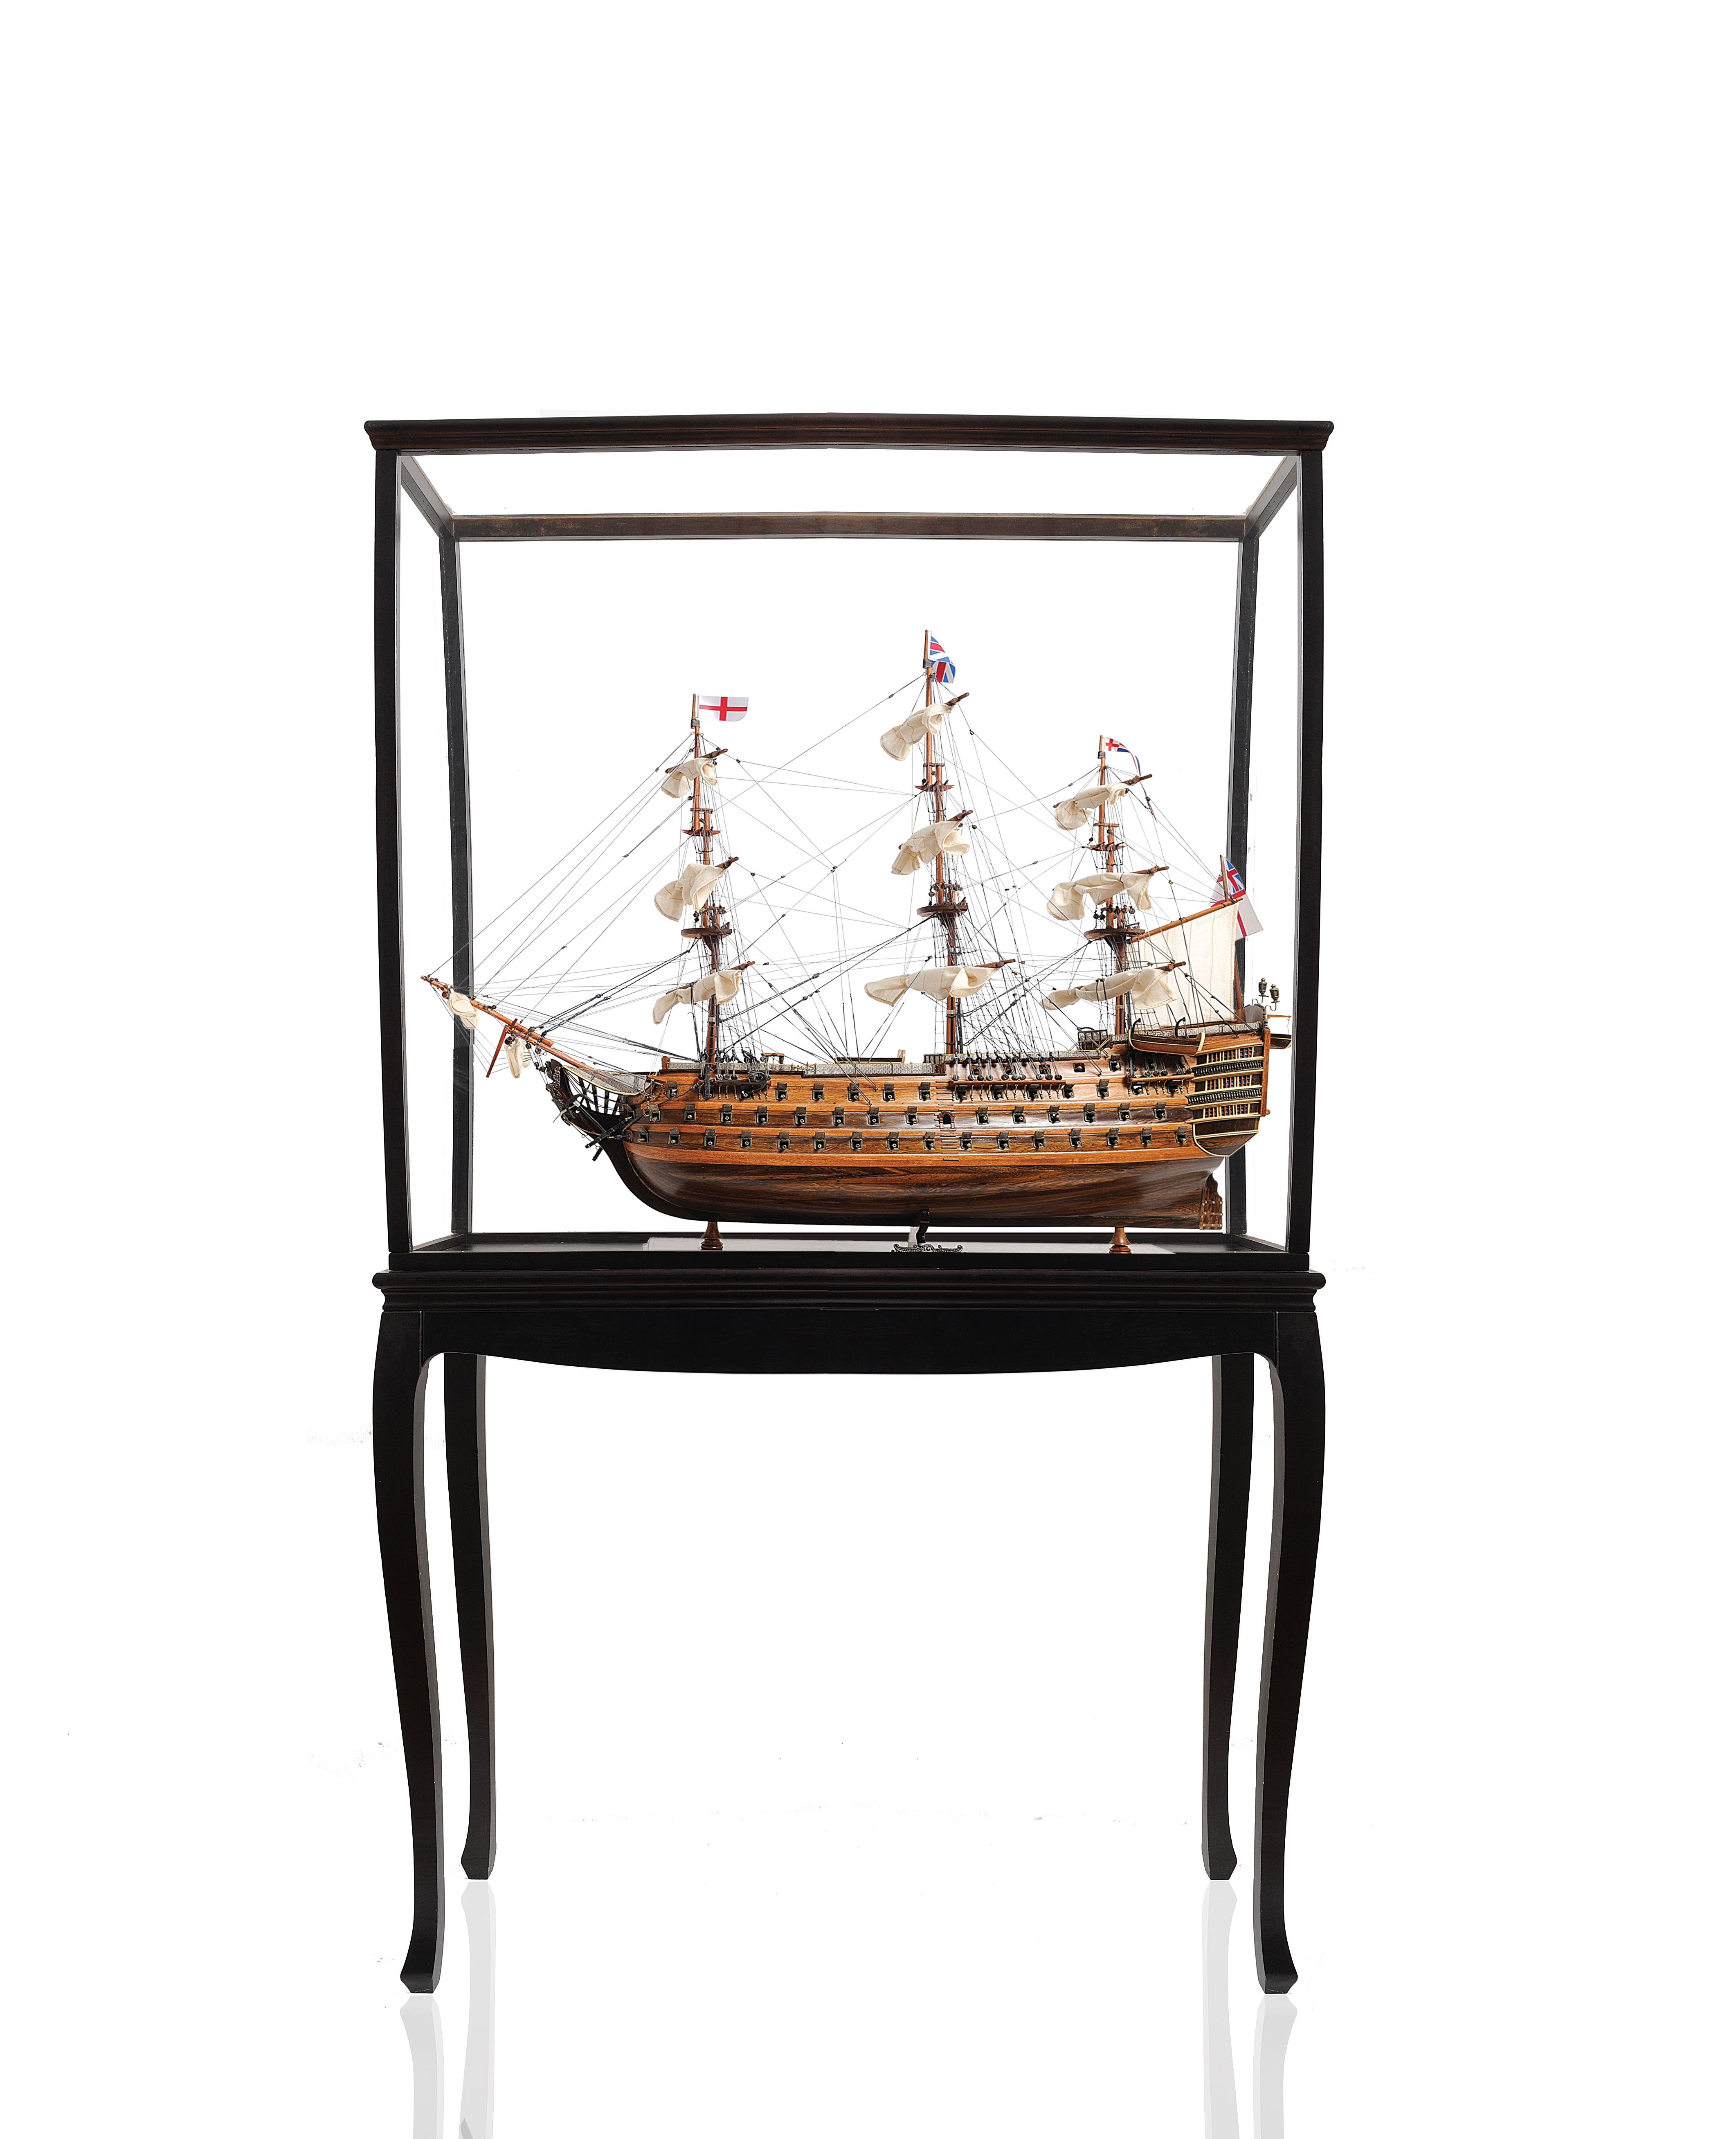 T034B HMS Victory Large With Floor Display Case t034b-hms-victory-large-with-floor-display-case-l01.jpg